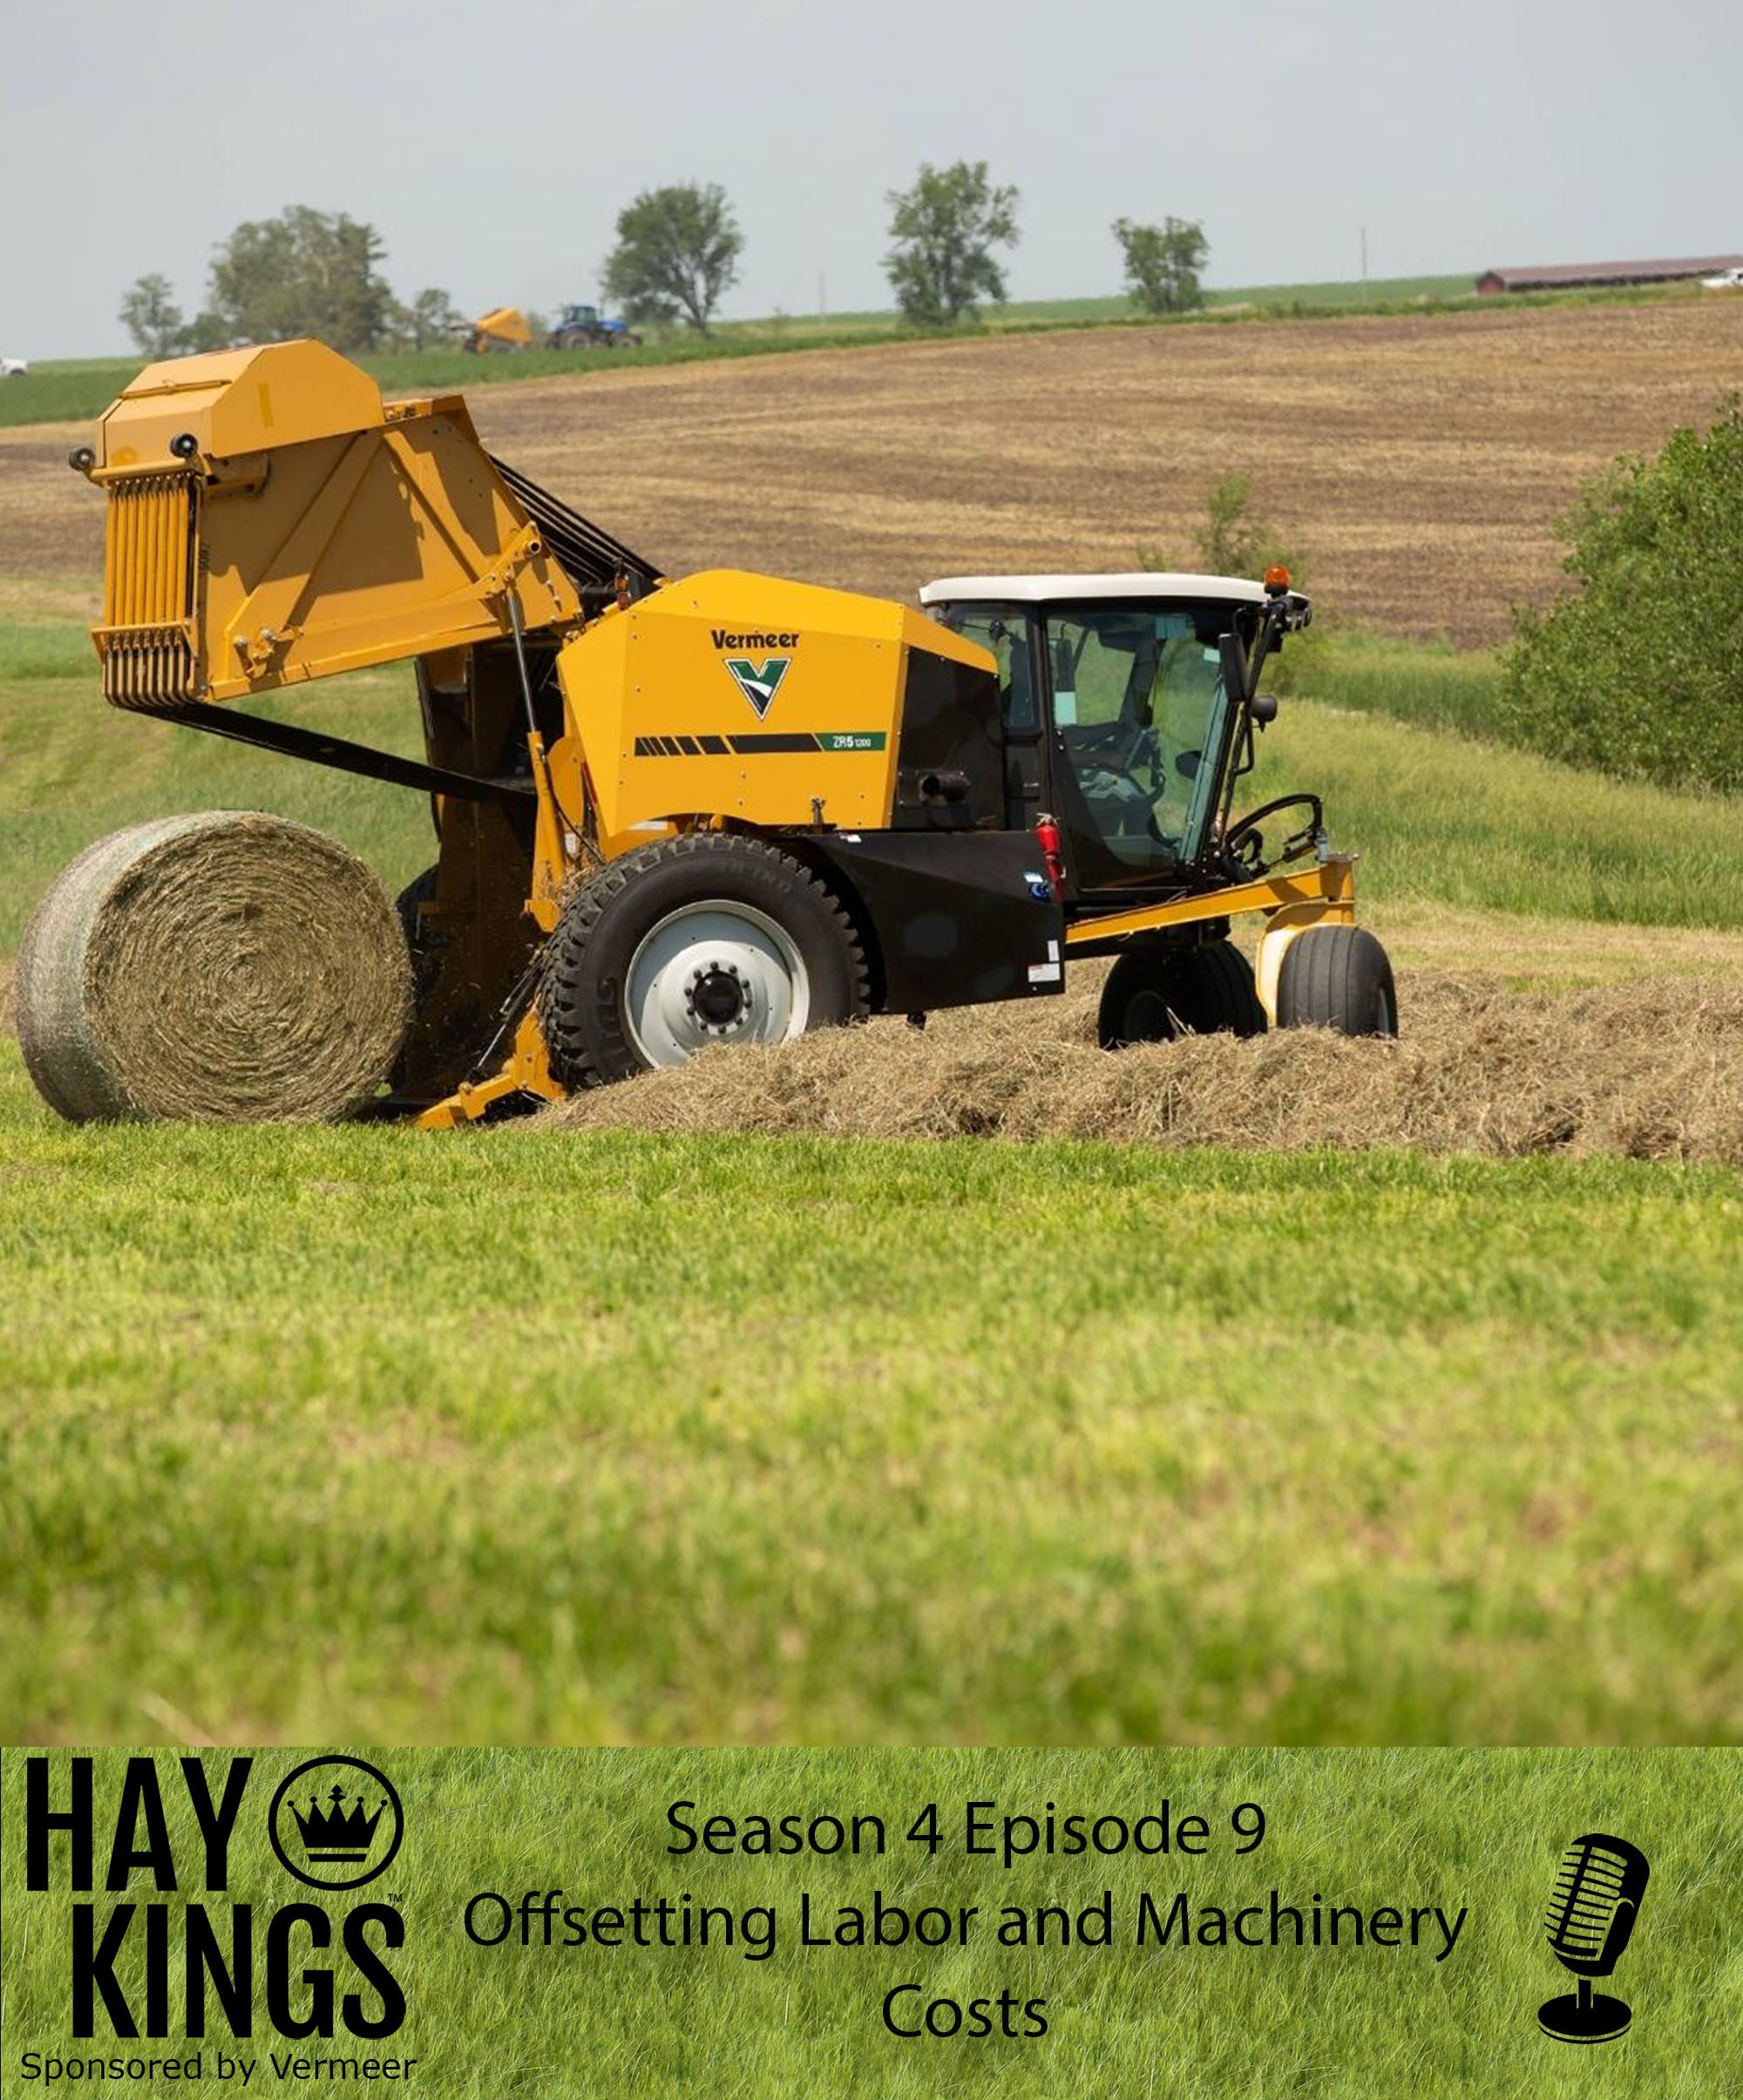 Hay Kings Podcast: Offsetting Labor and Machinery Costs (S4: E9)